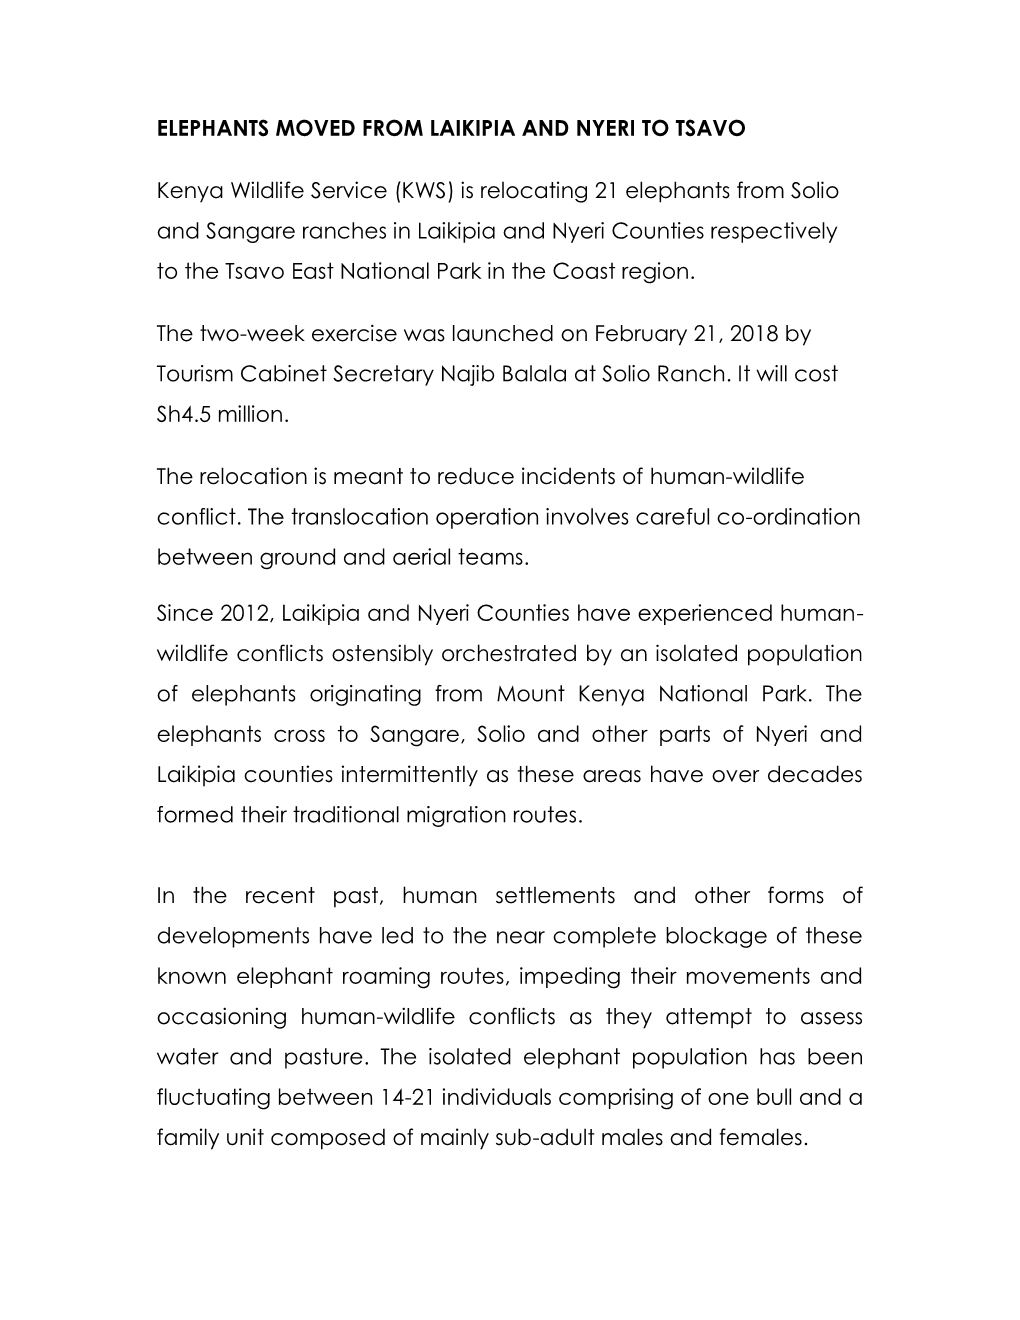 ELEPHANTS MOVED from LAIKIPIA and NYERI to TSAVO Kenya Wildlife Service (KWS) Is Relocating 21 Elephants from Solio and Sangare